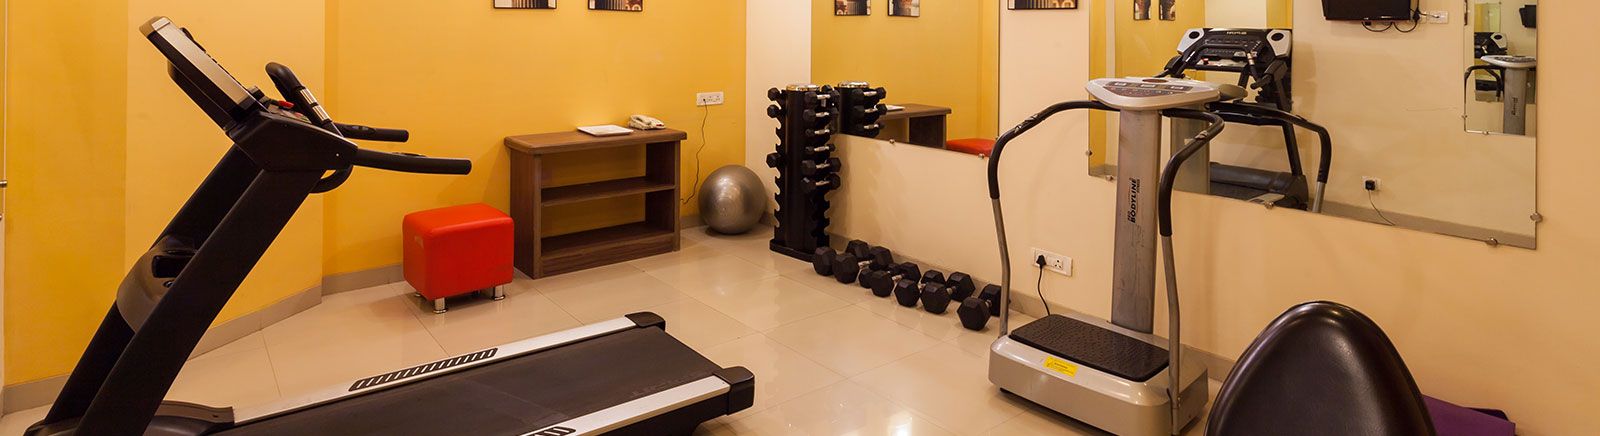 Ginger Indore Hotel Services & Facilities